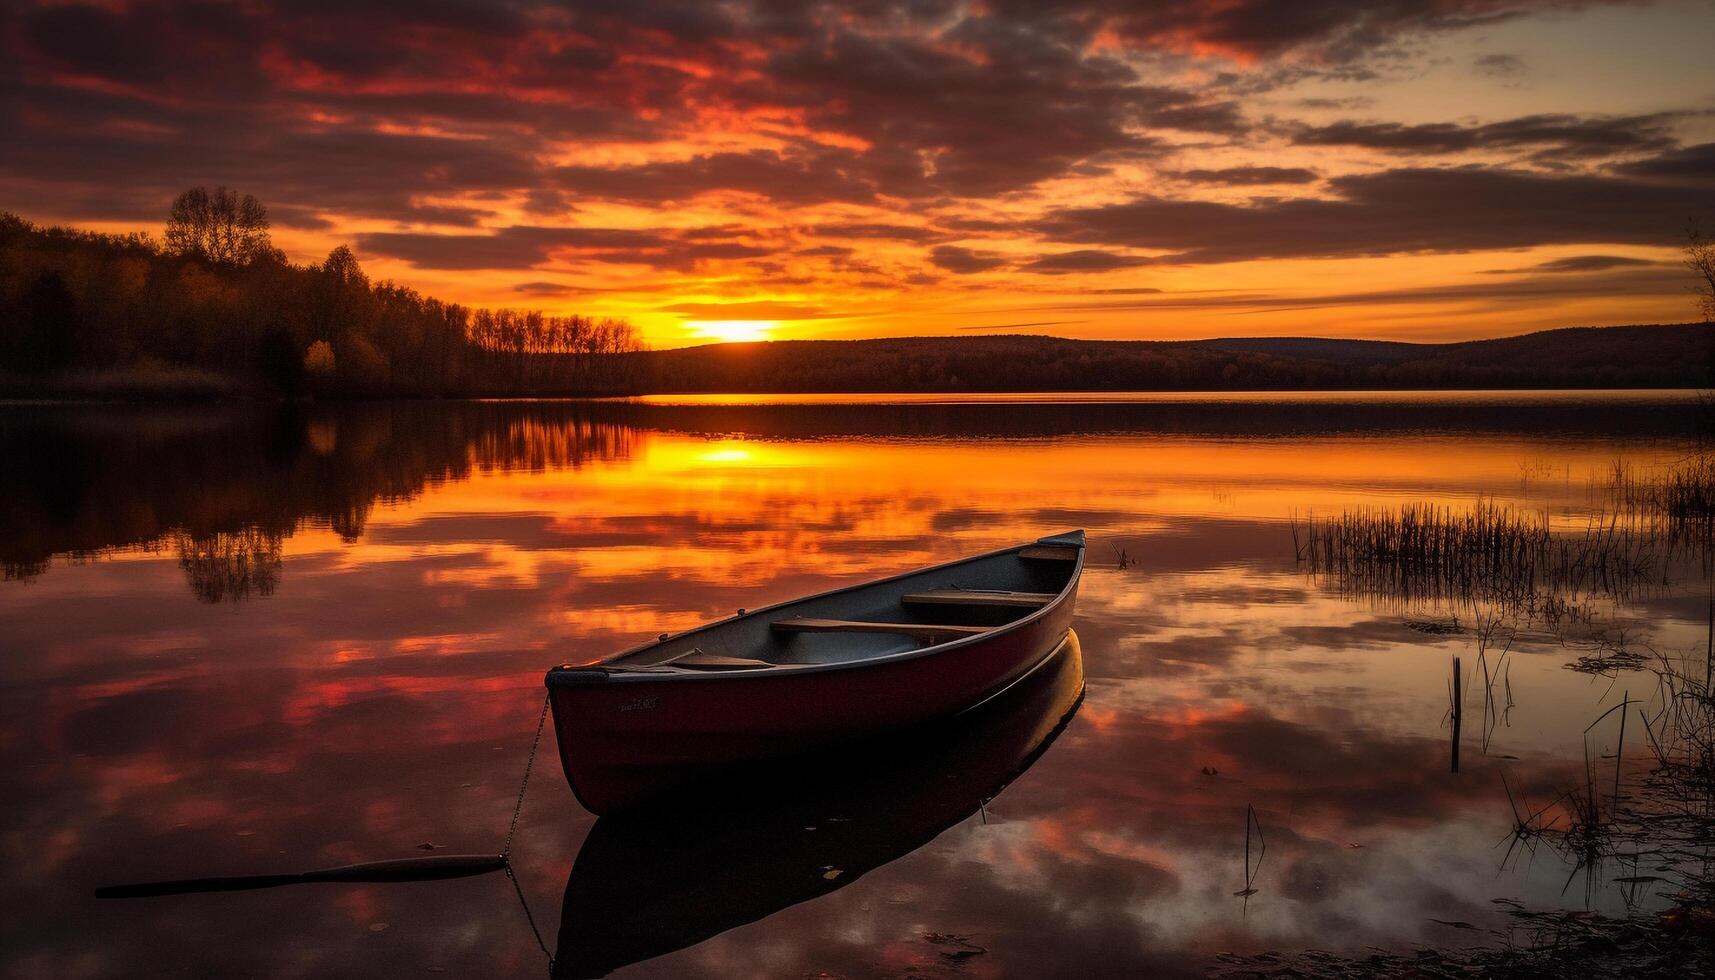 Tranquil scene of rowboat on calm pond generated by AI photo